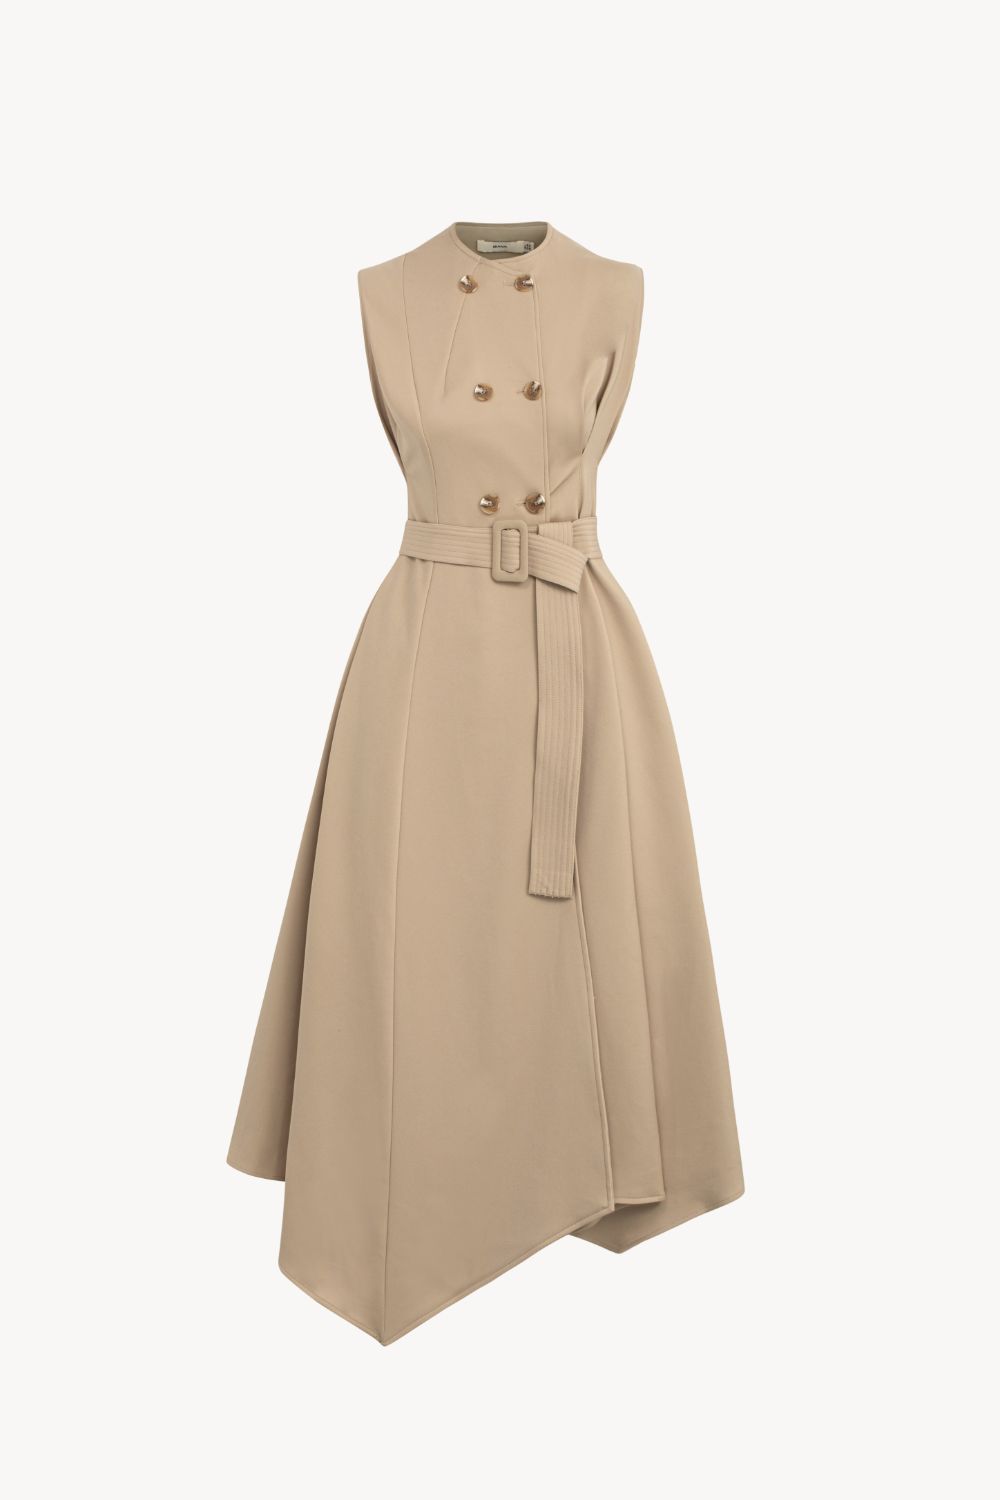 LEWIS Trench Dress